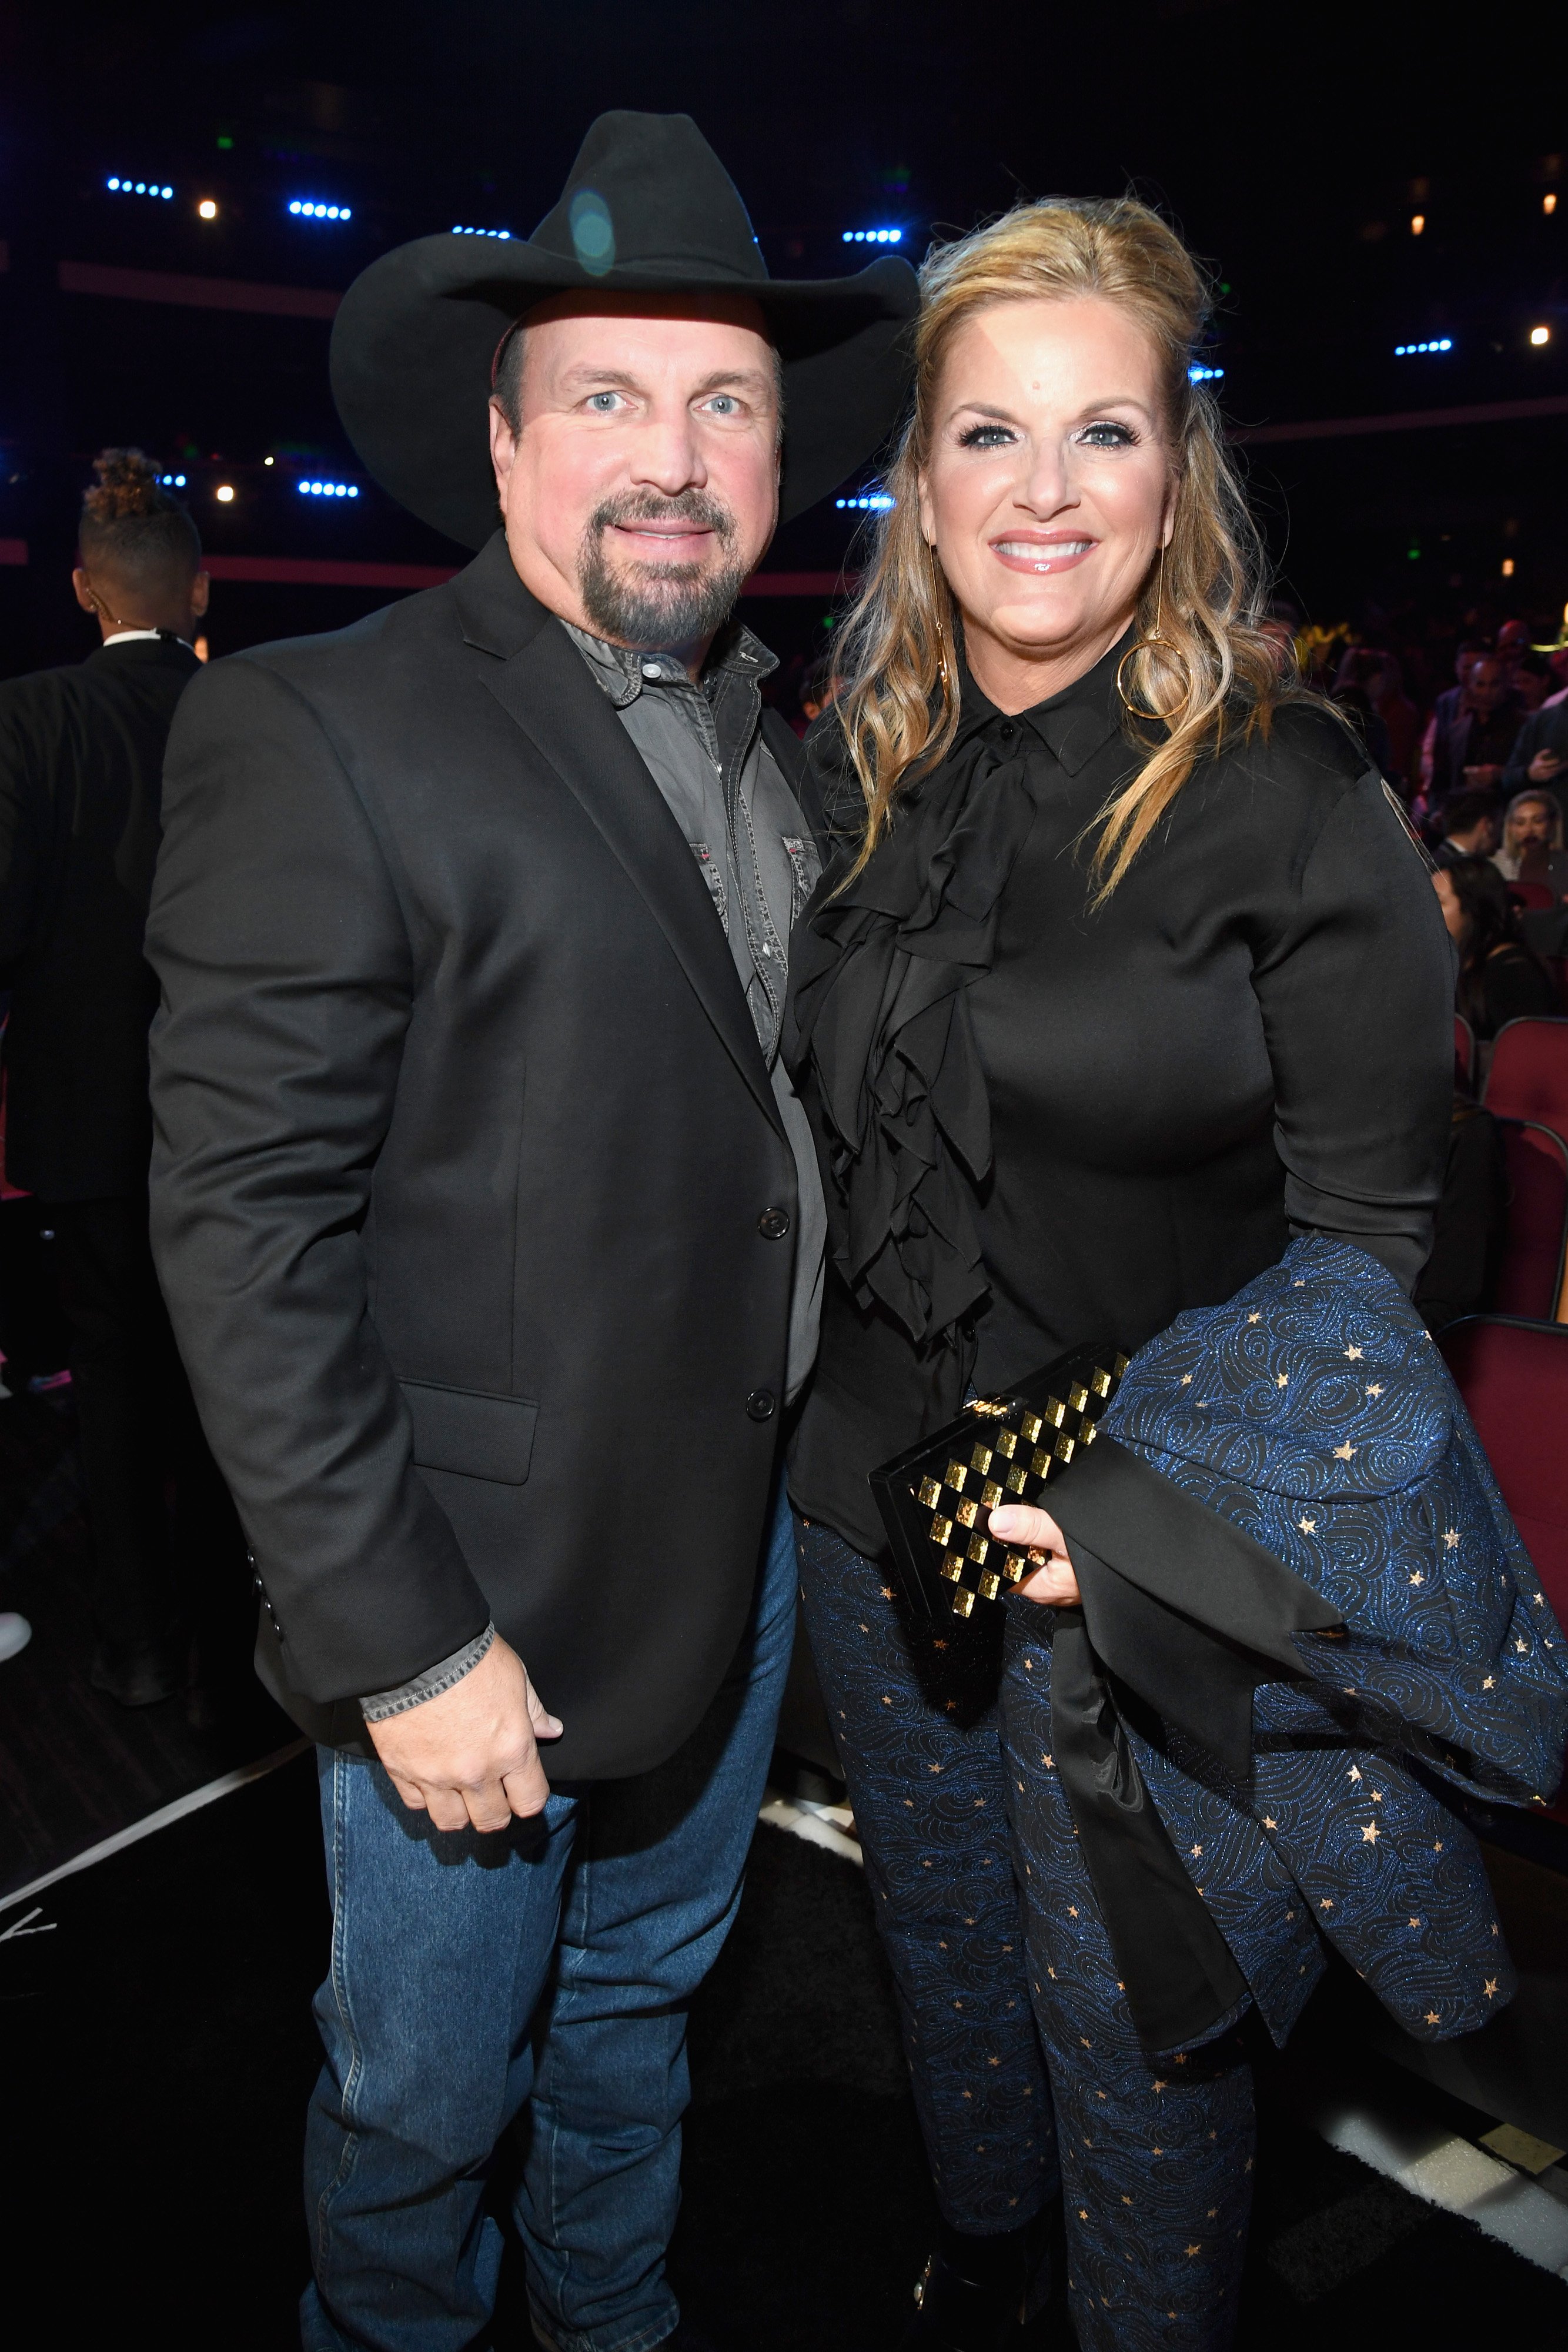 Garth Brooks and Trisha Yearwood attend the 2019 iHeartRadio Music Awards on March 14, 2019, in Los Angeles, California. | Source: Getty Images.